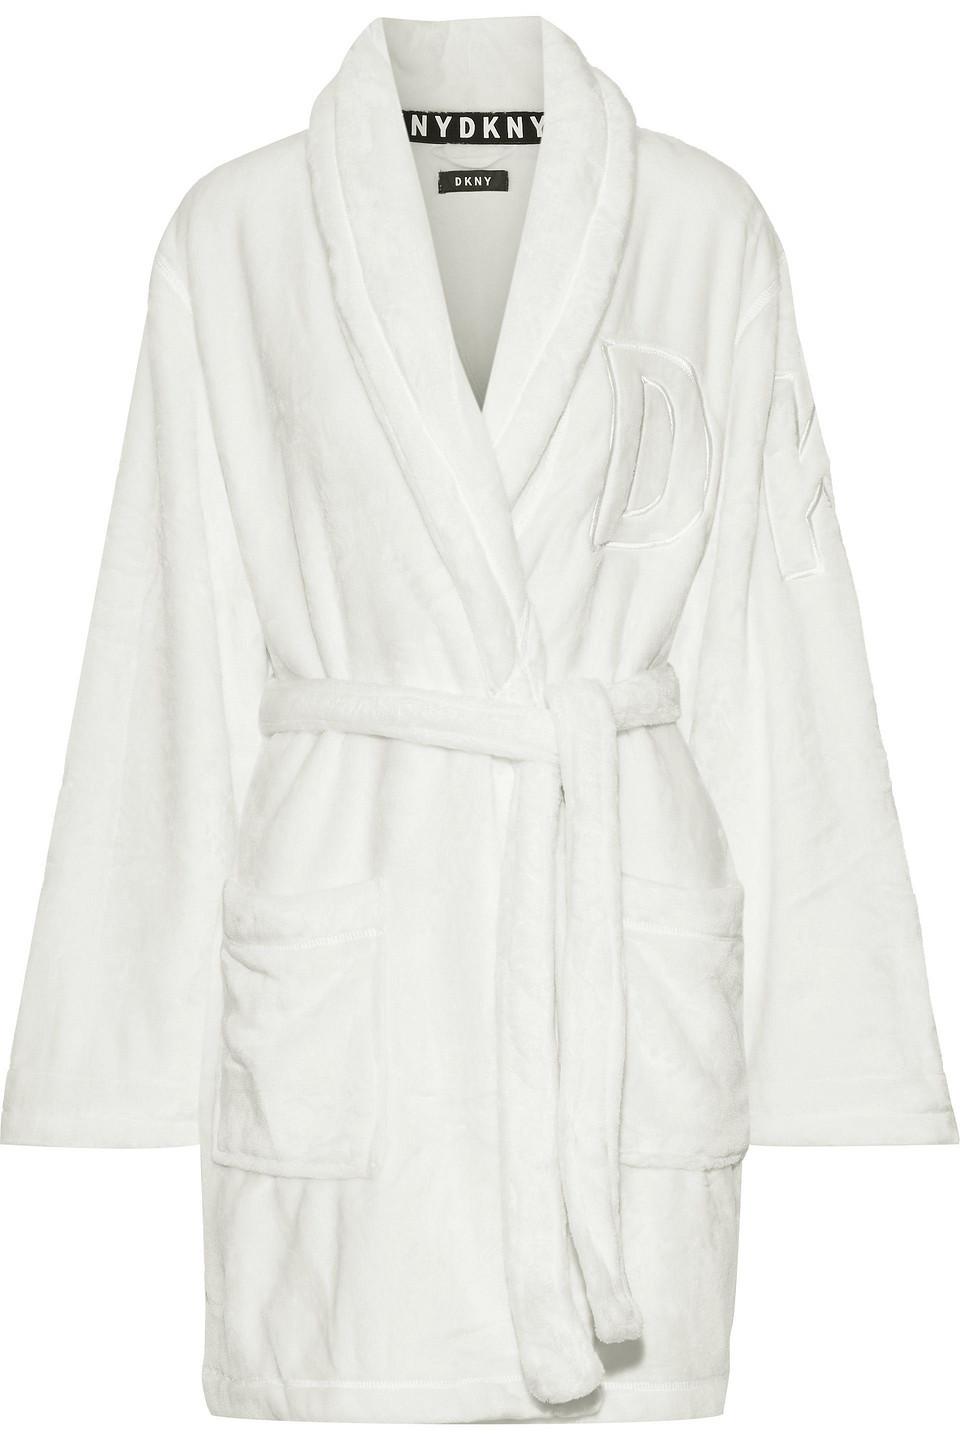 DKNY Embroidered Fleece Hooded Robe Ivory in White - Lyst